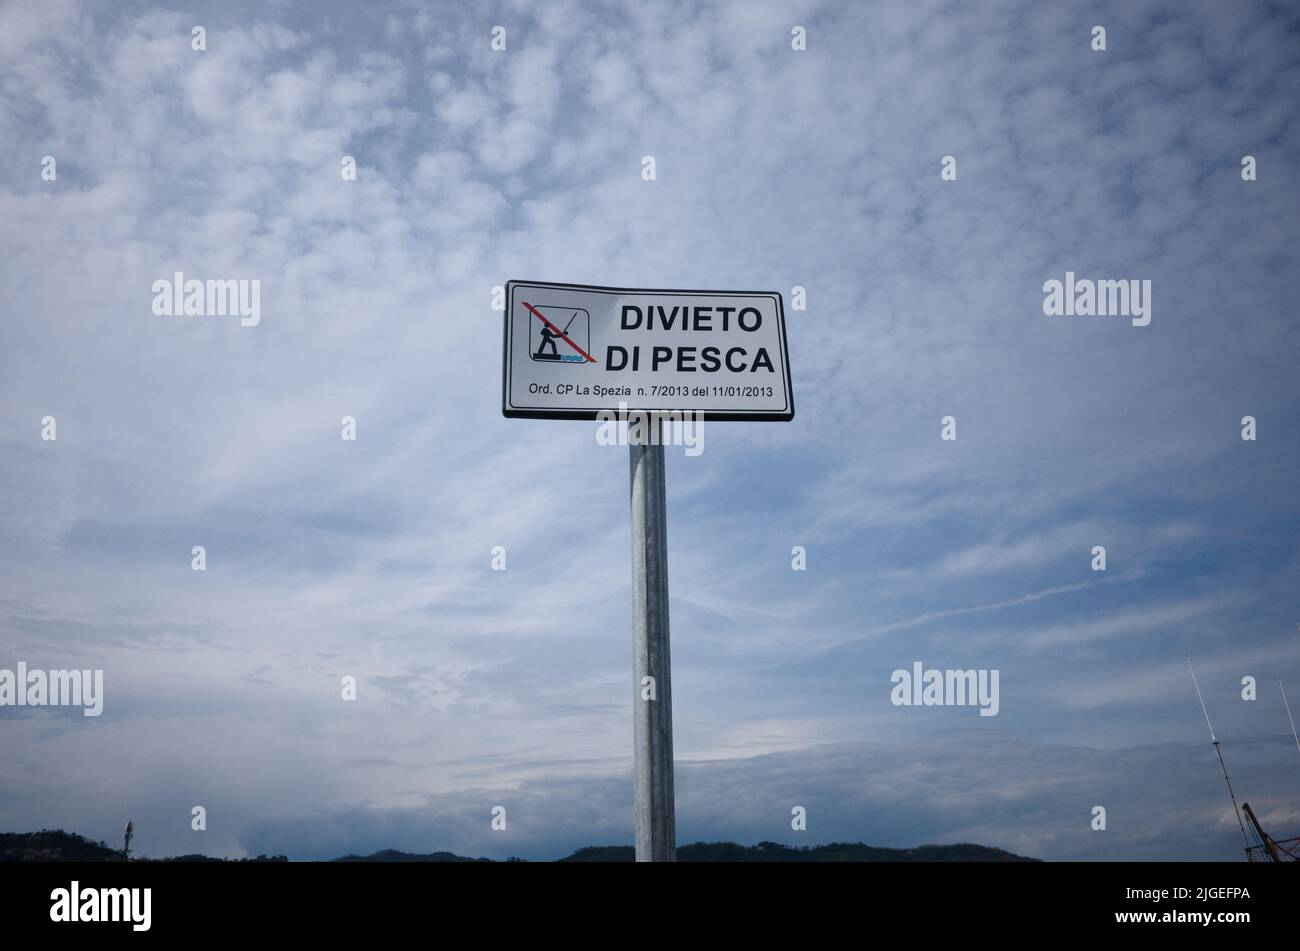 White plate against cloudy sky that says Divieto di Pesca means Fishing prohibited in Italian. Fishing prohibited sign on pier, La Spezia, Liguria Stock Photo